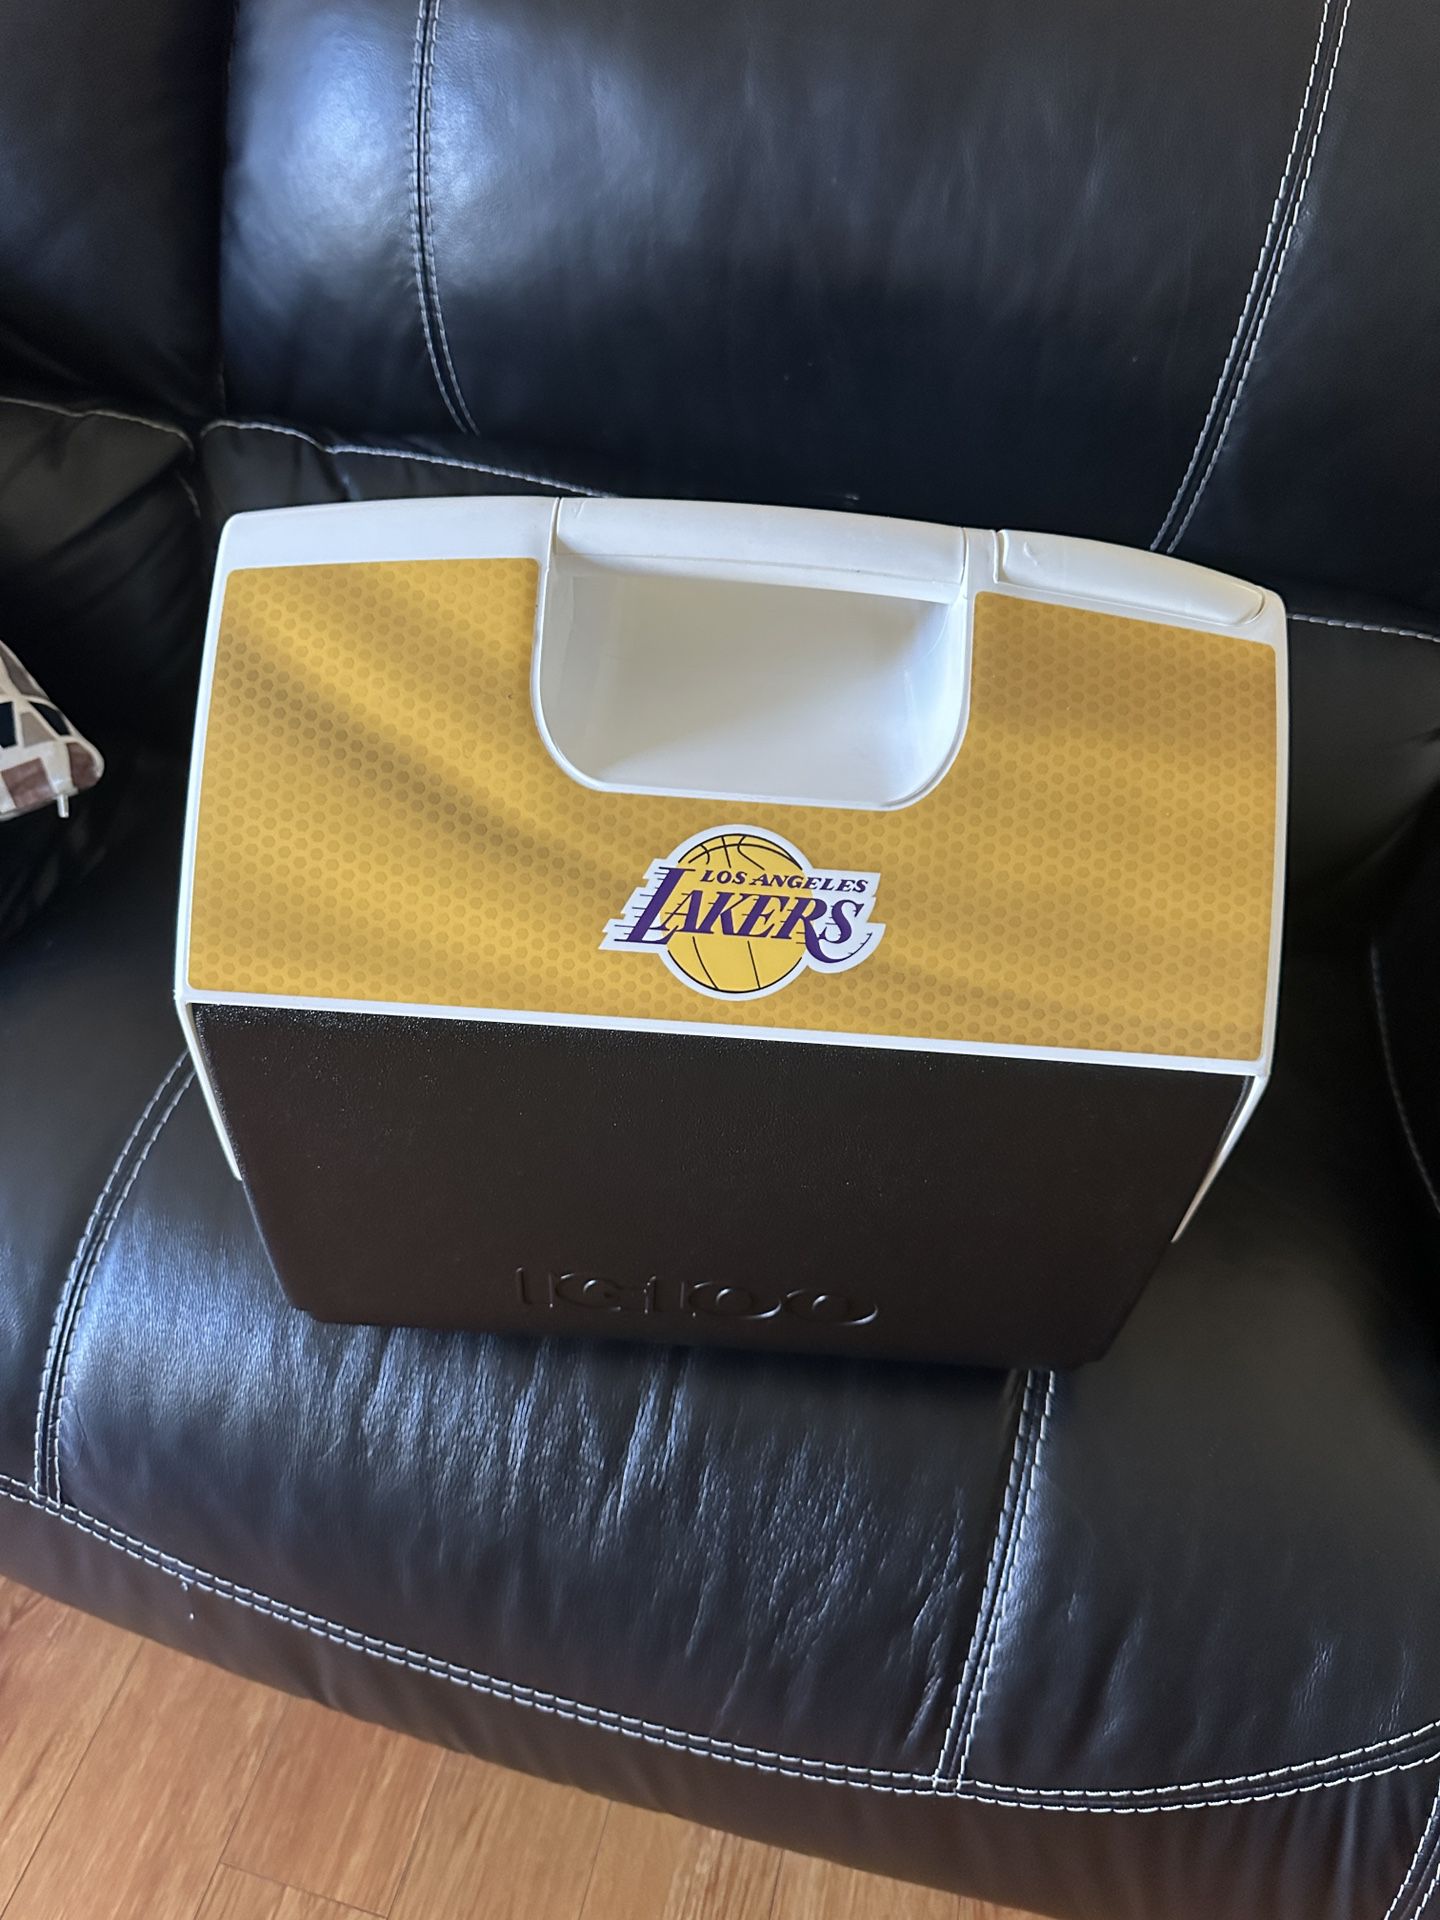 Lakers Cooler